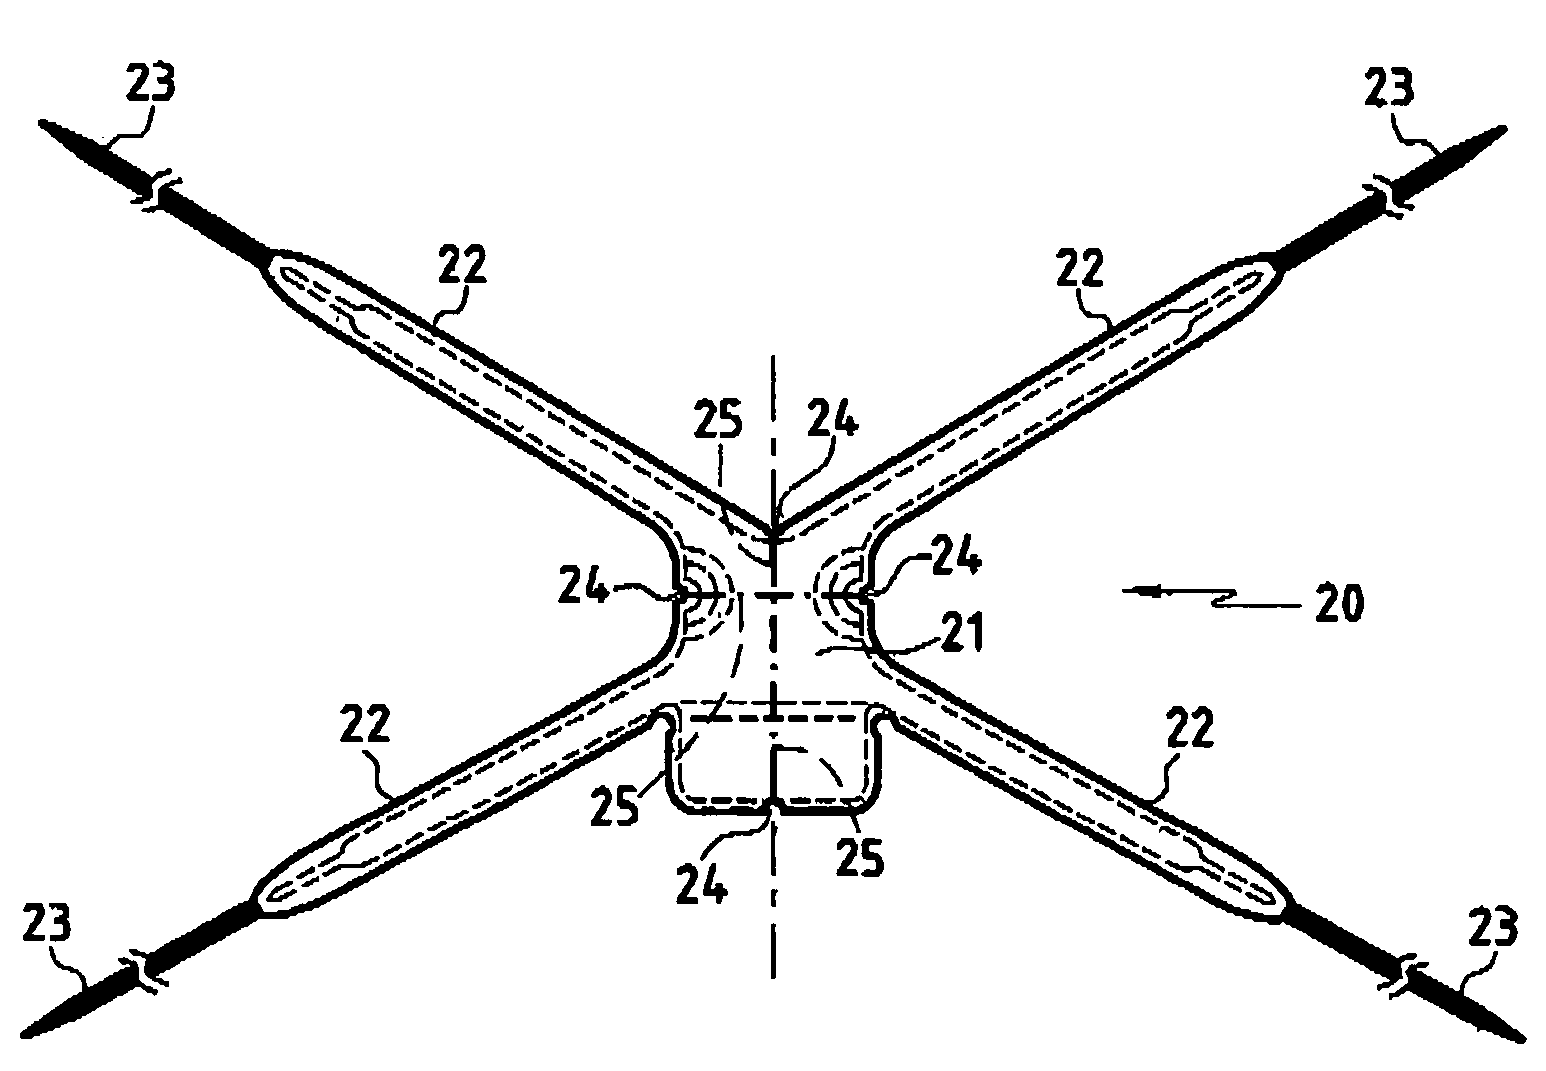 Implant for treating rectocele and a device for putting said implant into place